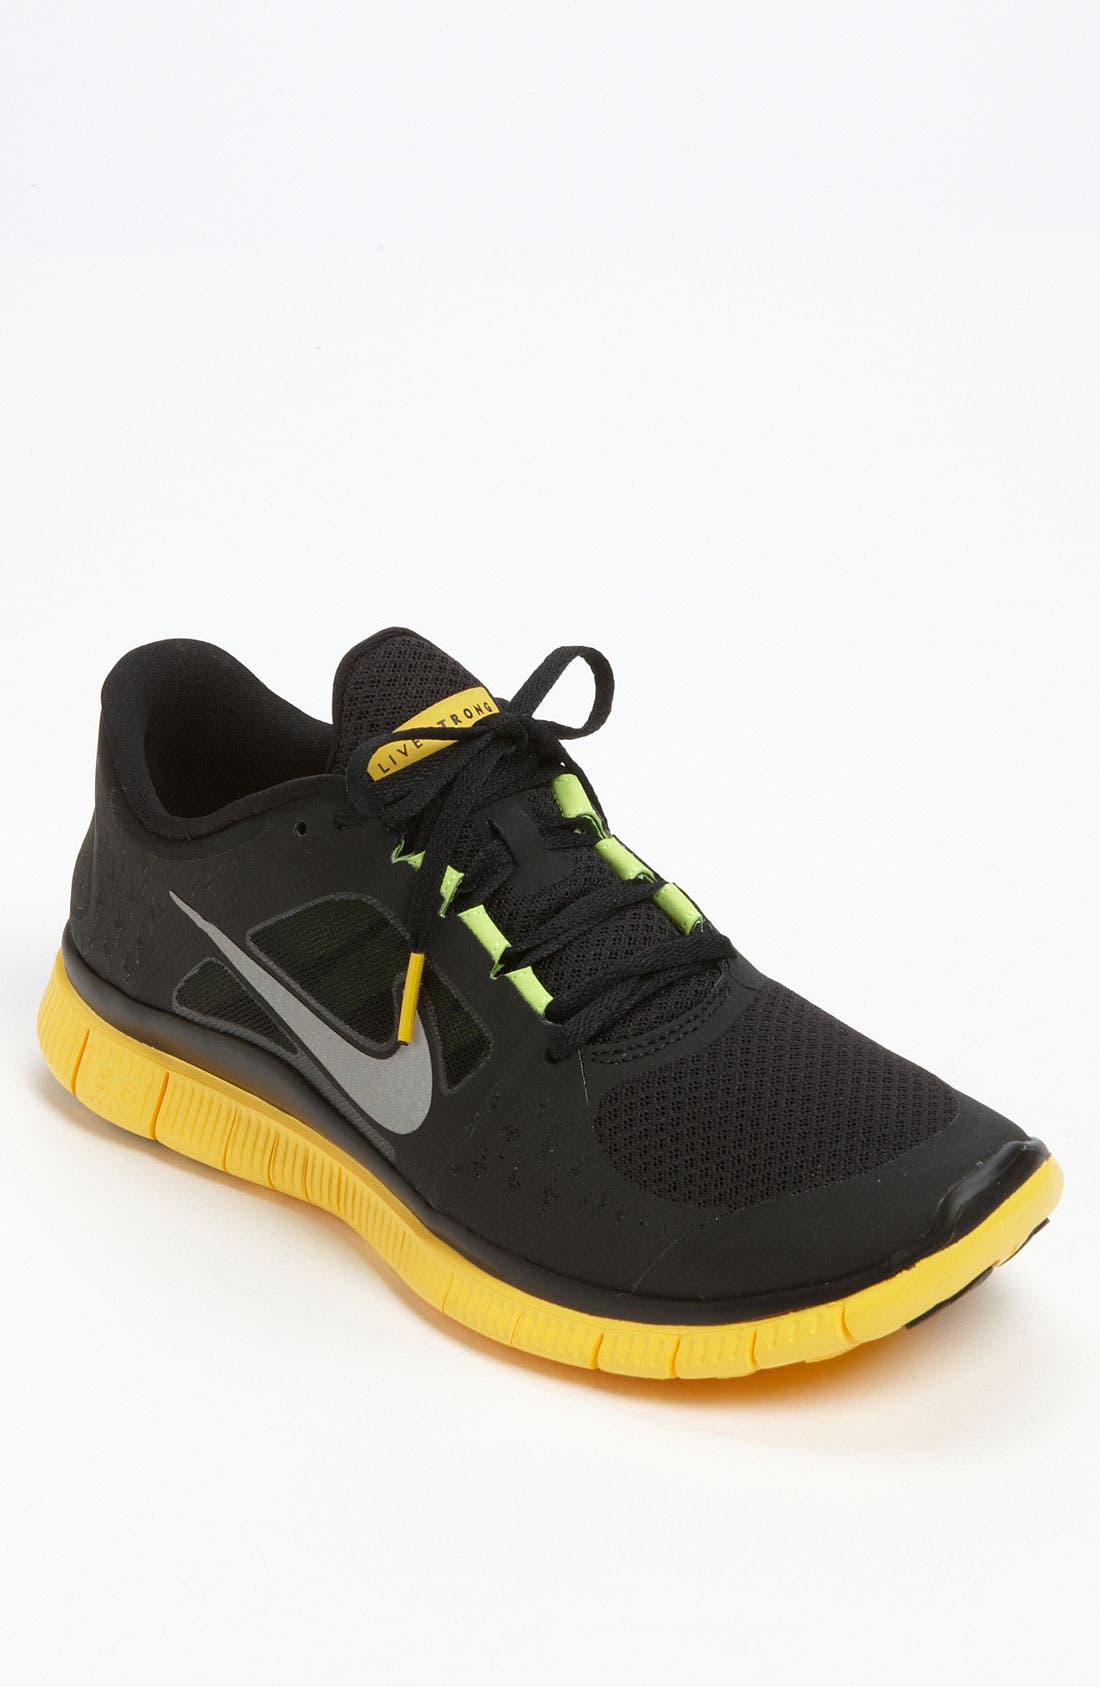 nordstrom nike running shoes